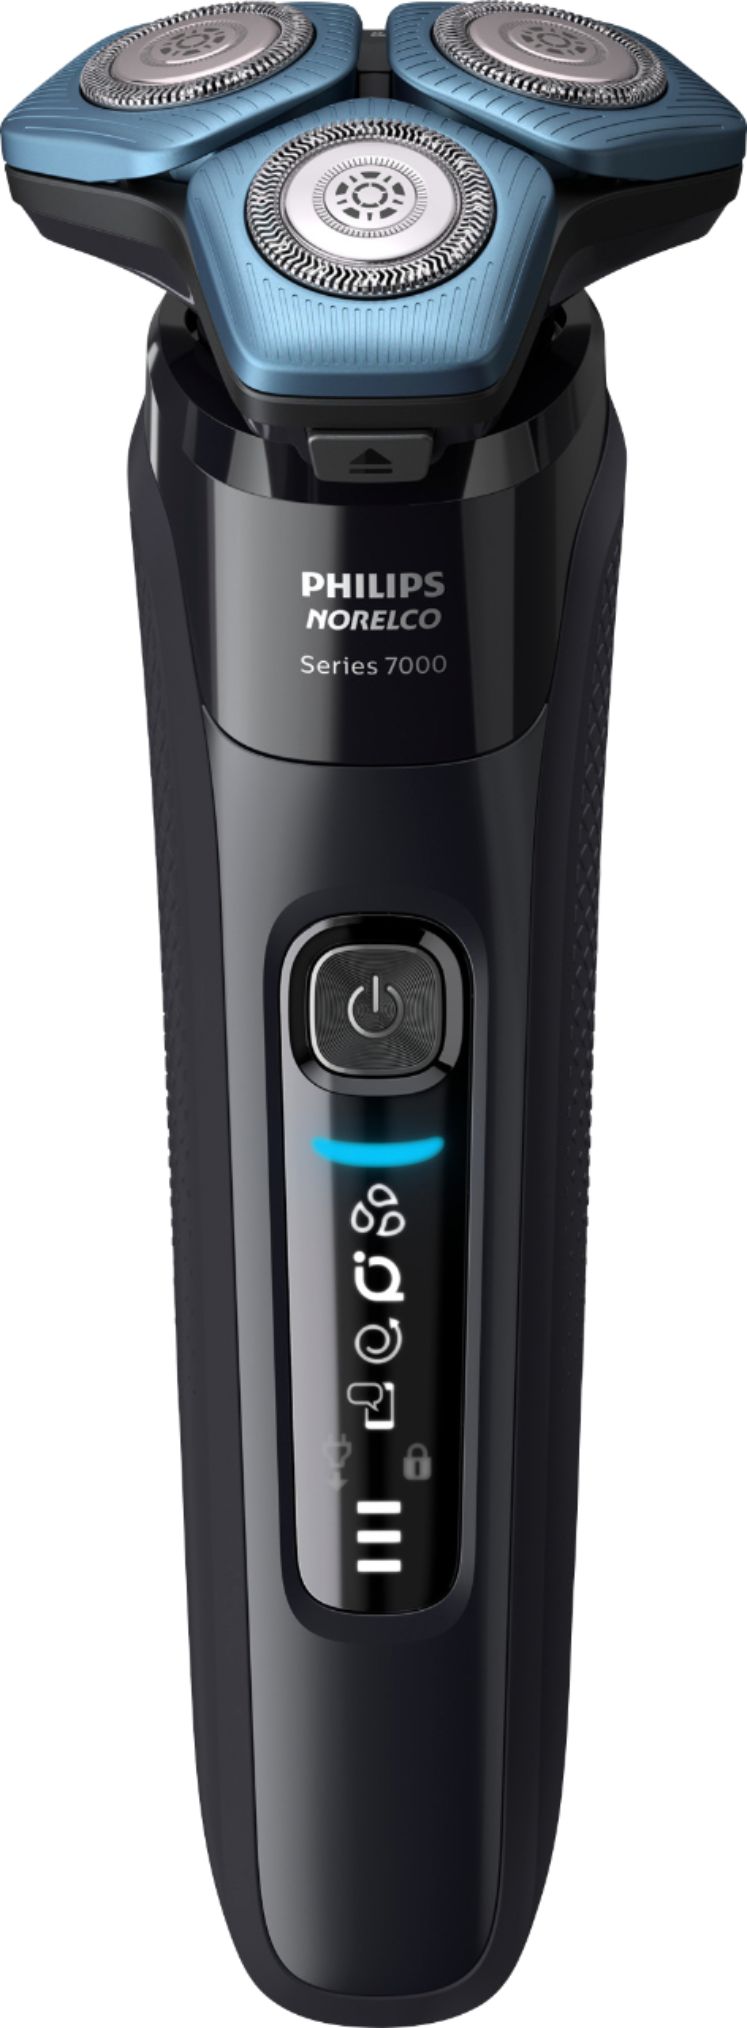 Left View: Philips Norelco Shaver 7500, Rechargeable Wet & Dry Electric Shaver with SenseIQ Technology - Ink Black